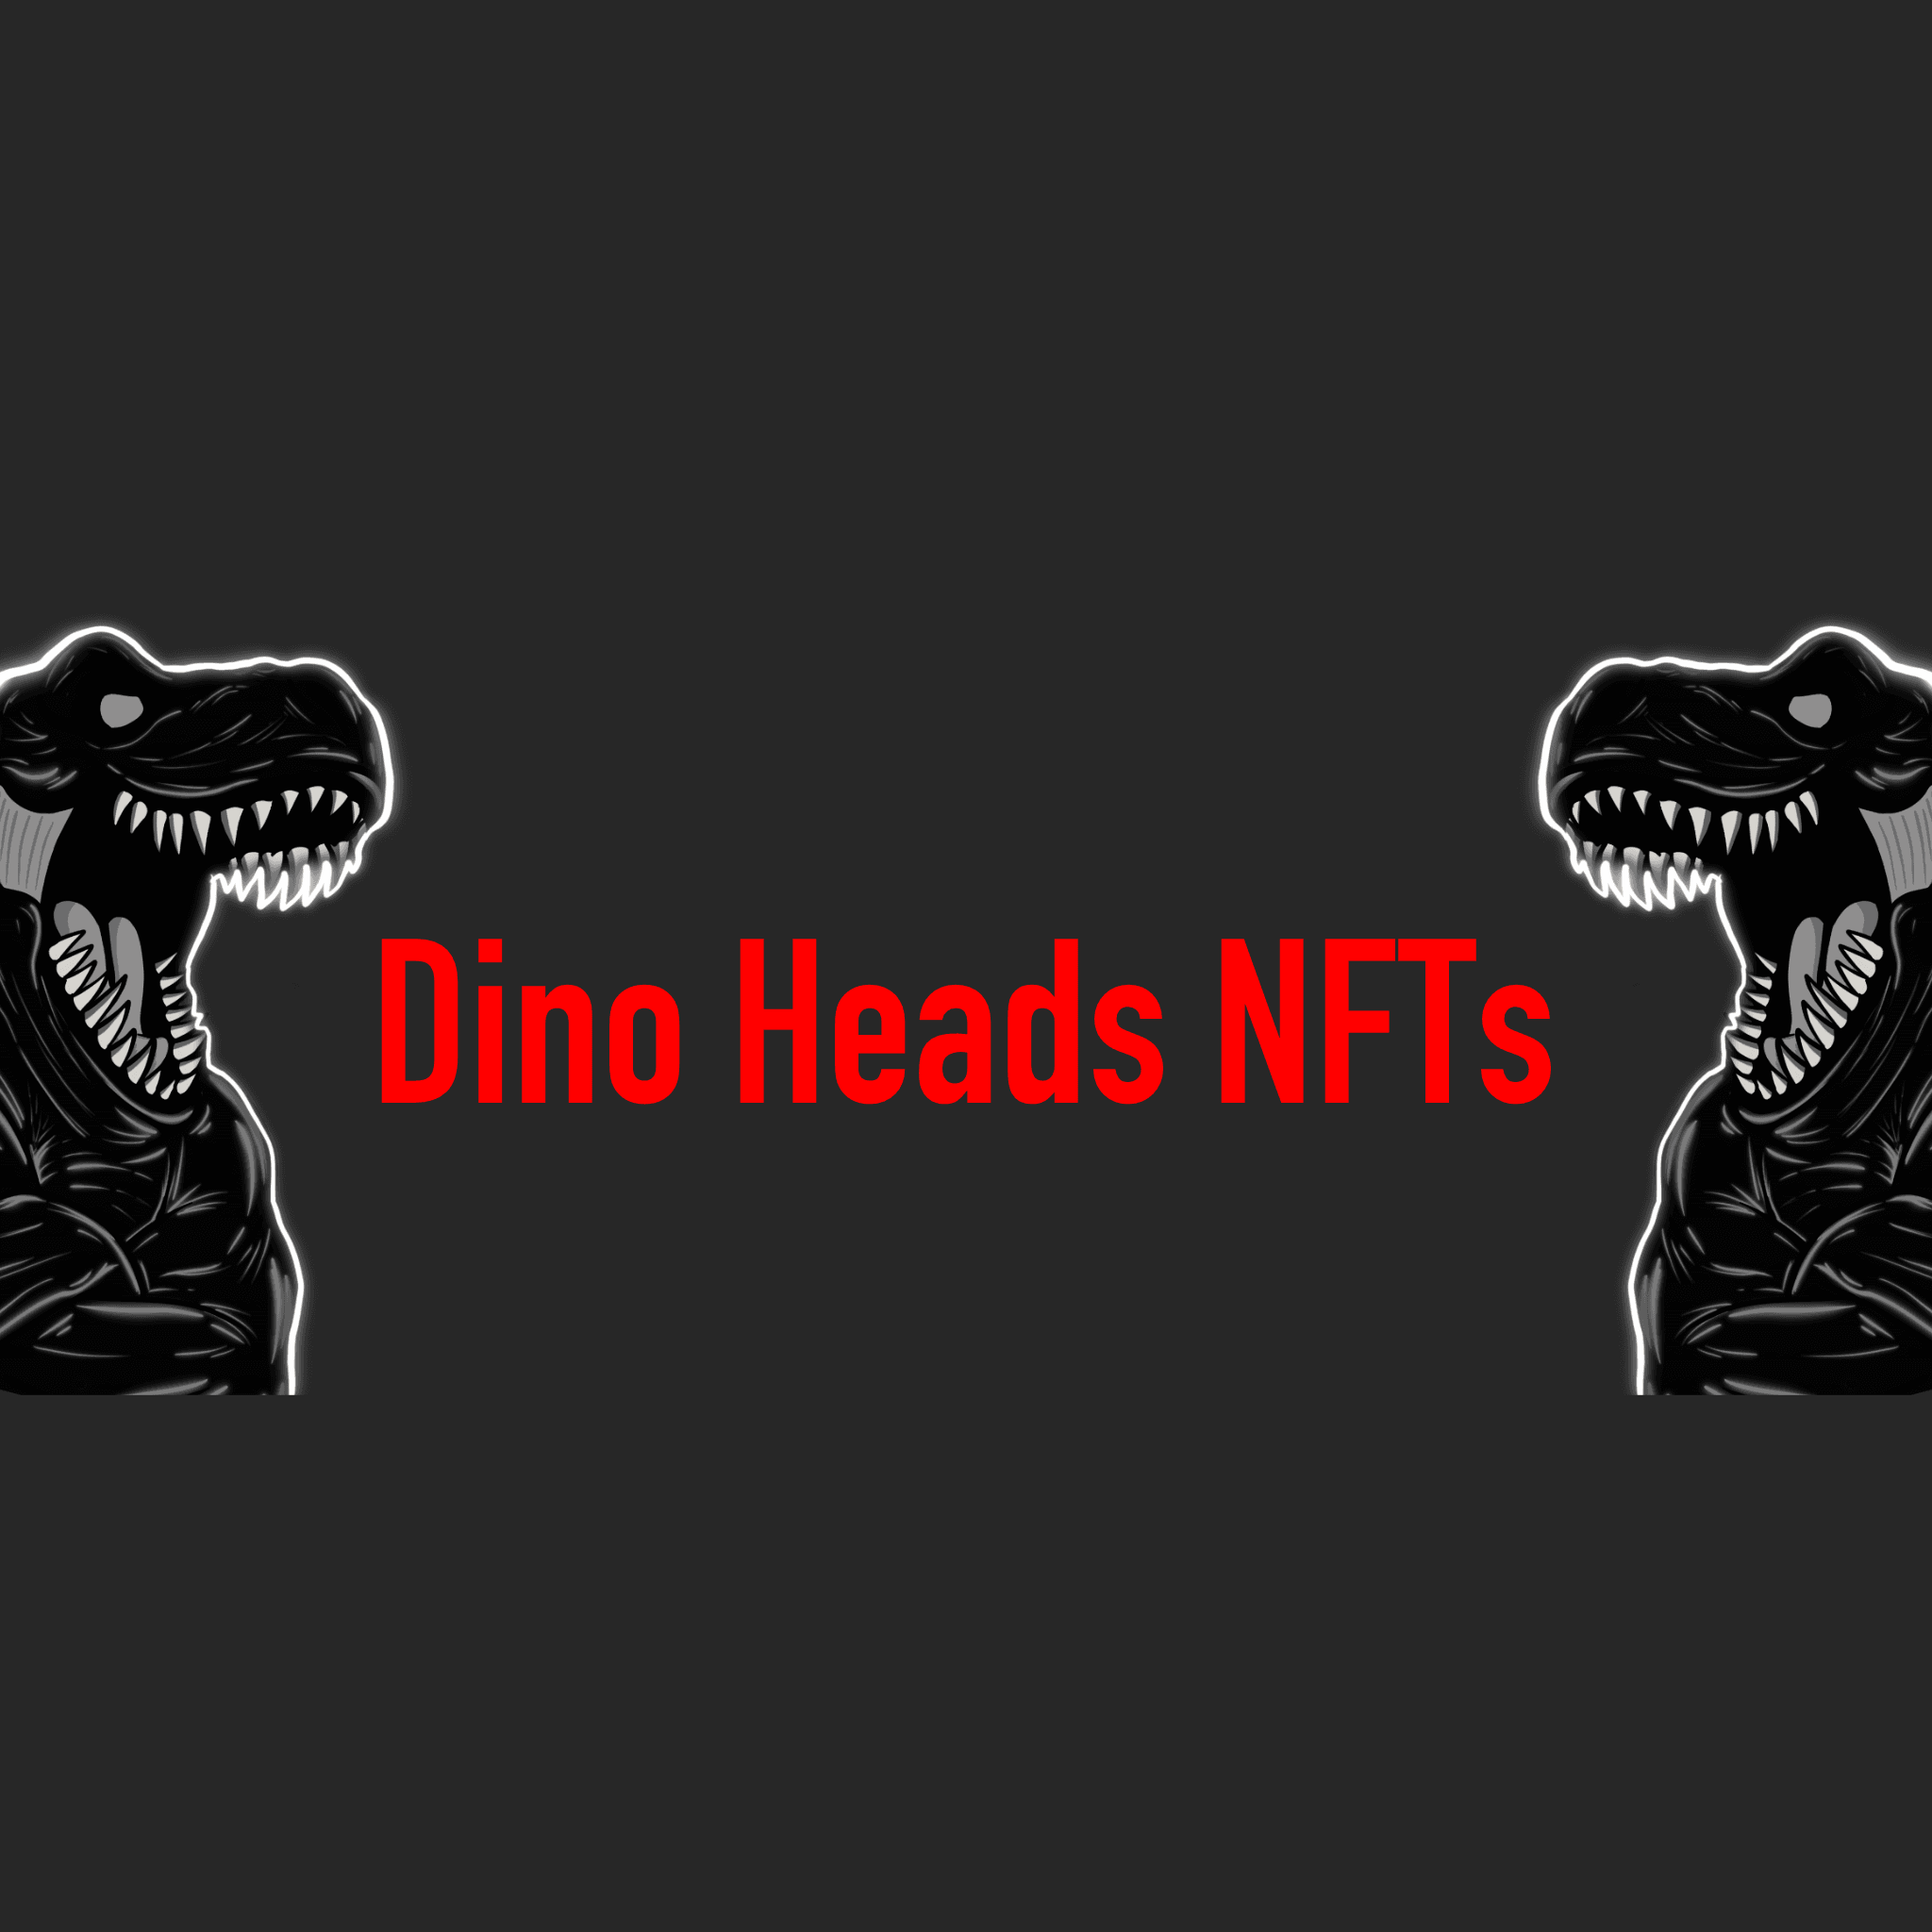 DinoHeadsNFTs banner